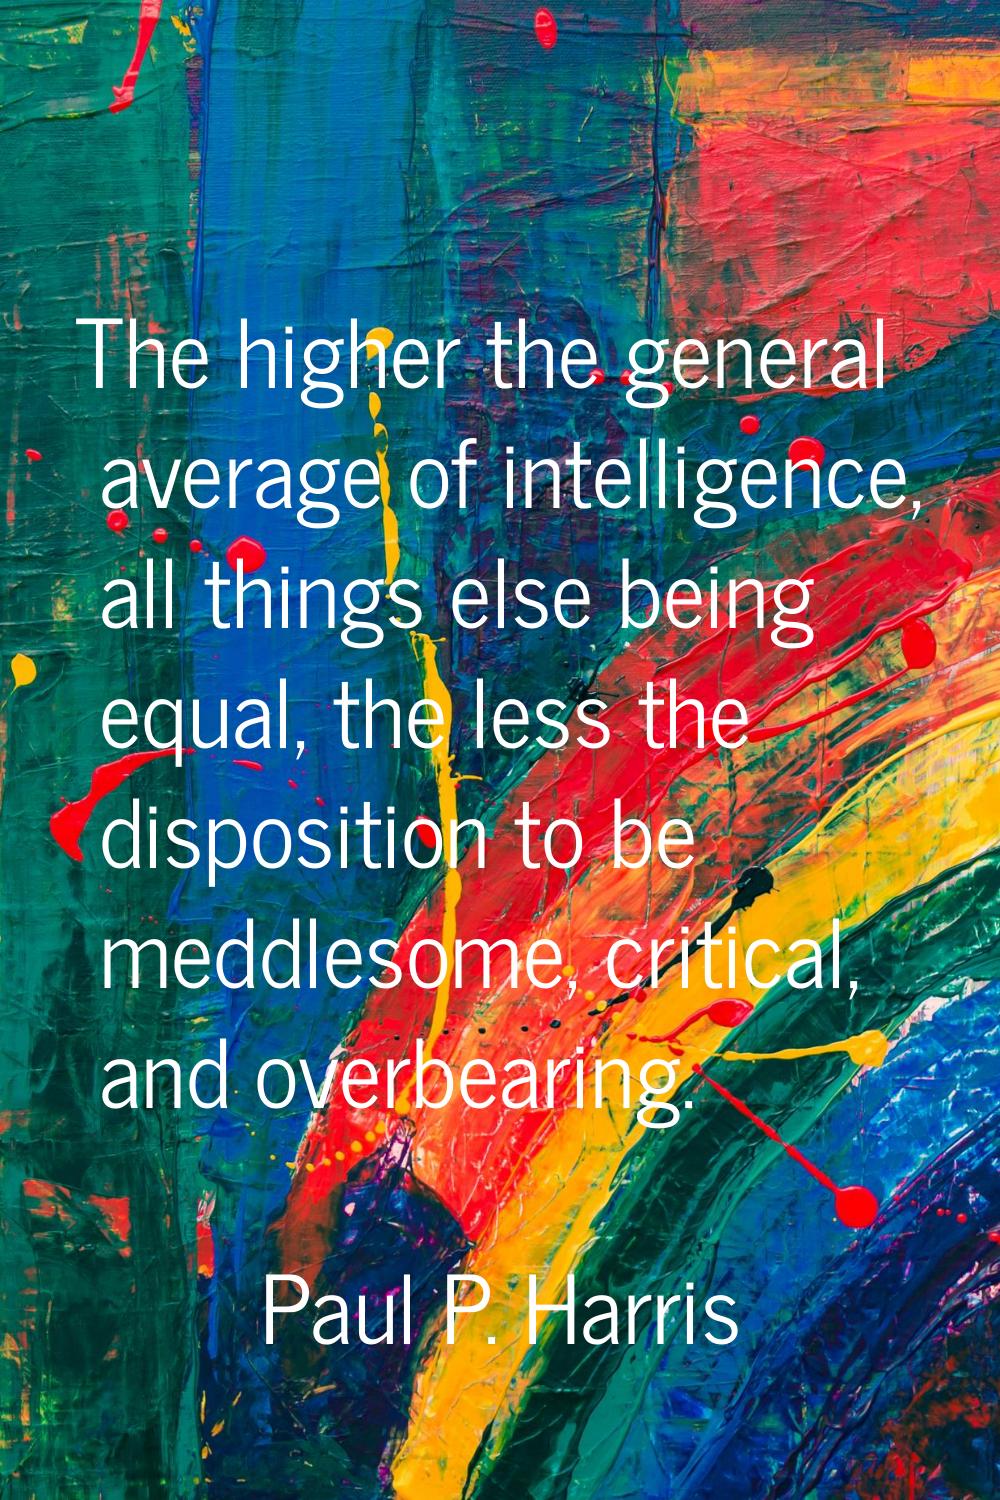 The higher the general average of intelligence, all things else being equal, the less the dispositi